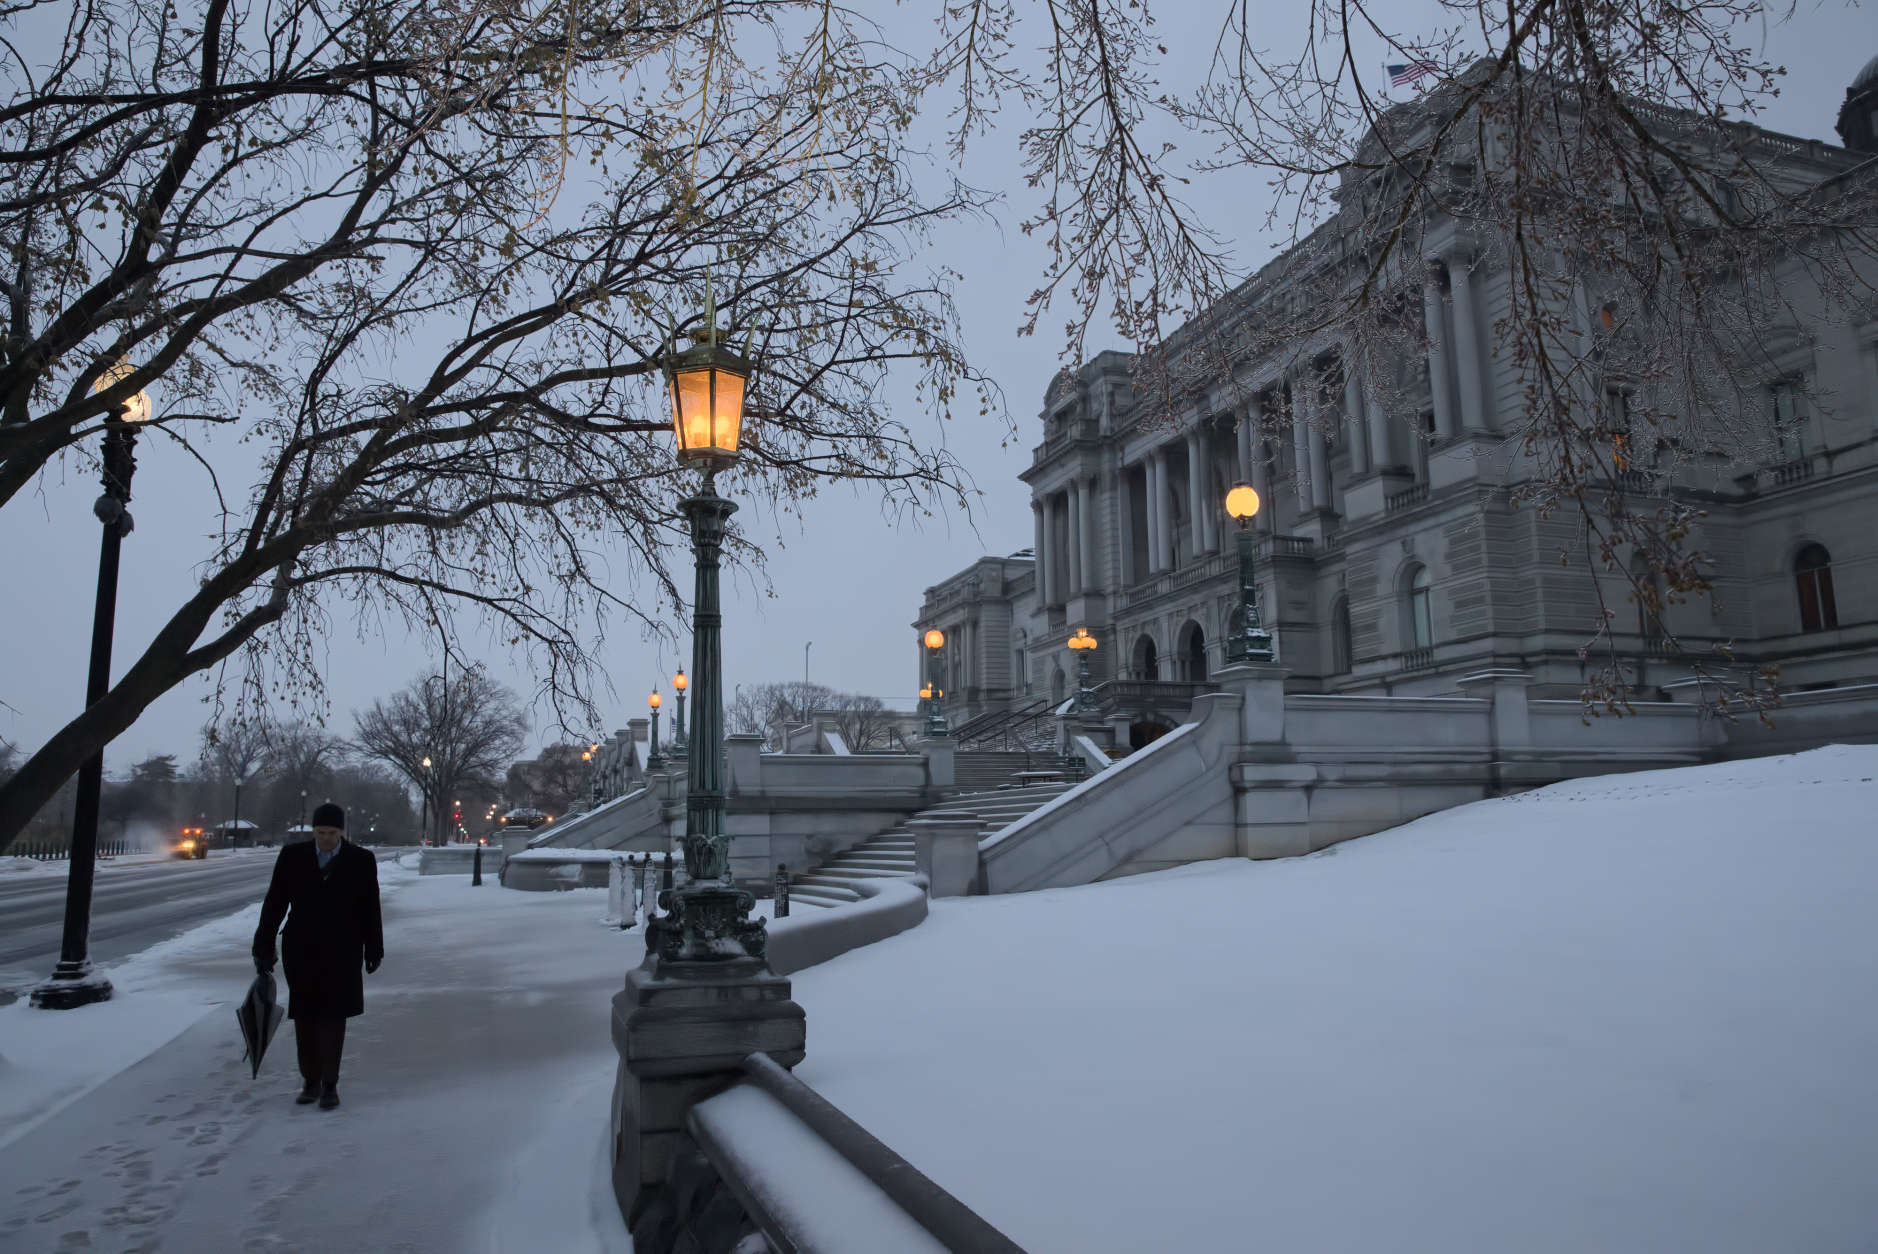 A man walks past the Library of Congress in the snow, on Capitol Hill in Washington, early Tuesday, March, 14, 2017. A late-season storm is dumping a messy mix of snow, sleet and rain on the mid-Atlantic, complicating travel, knocking out power and closing schools and government offices around the region.  (AP Photo/J. Scott Applewhite)